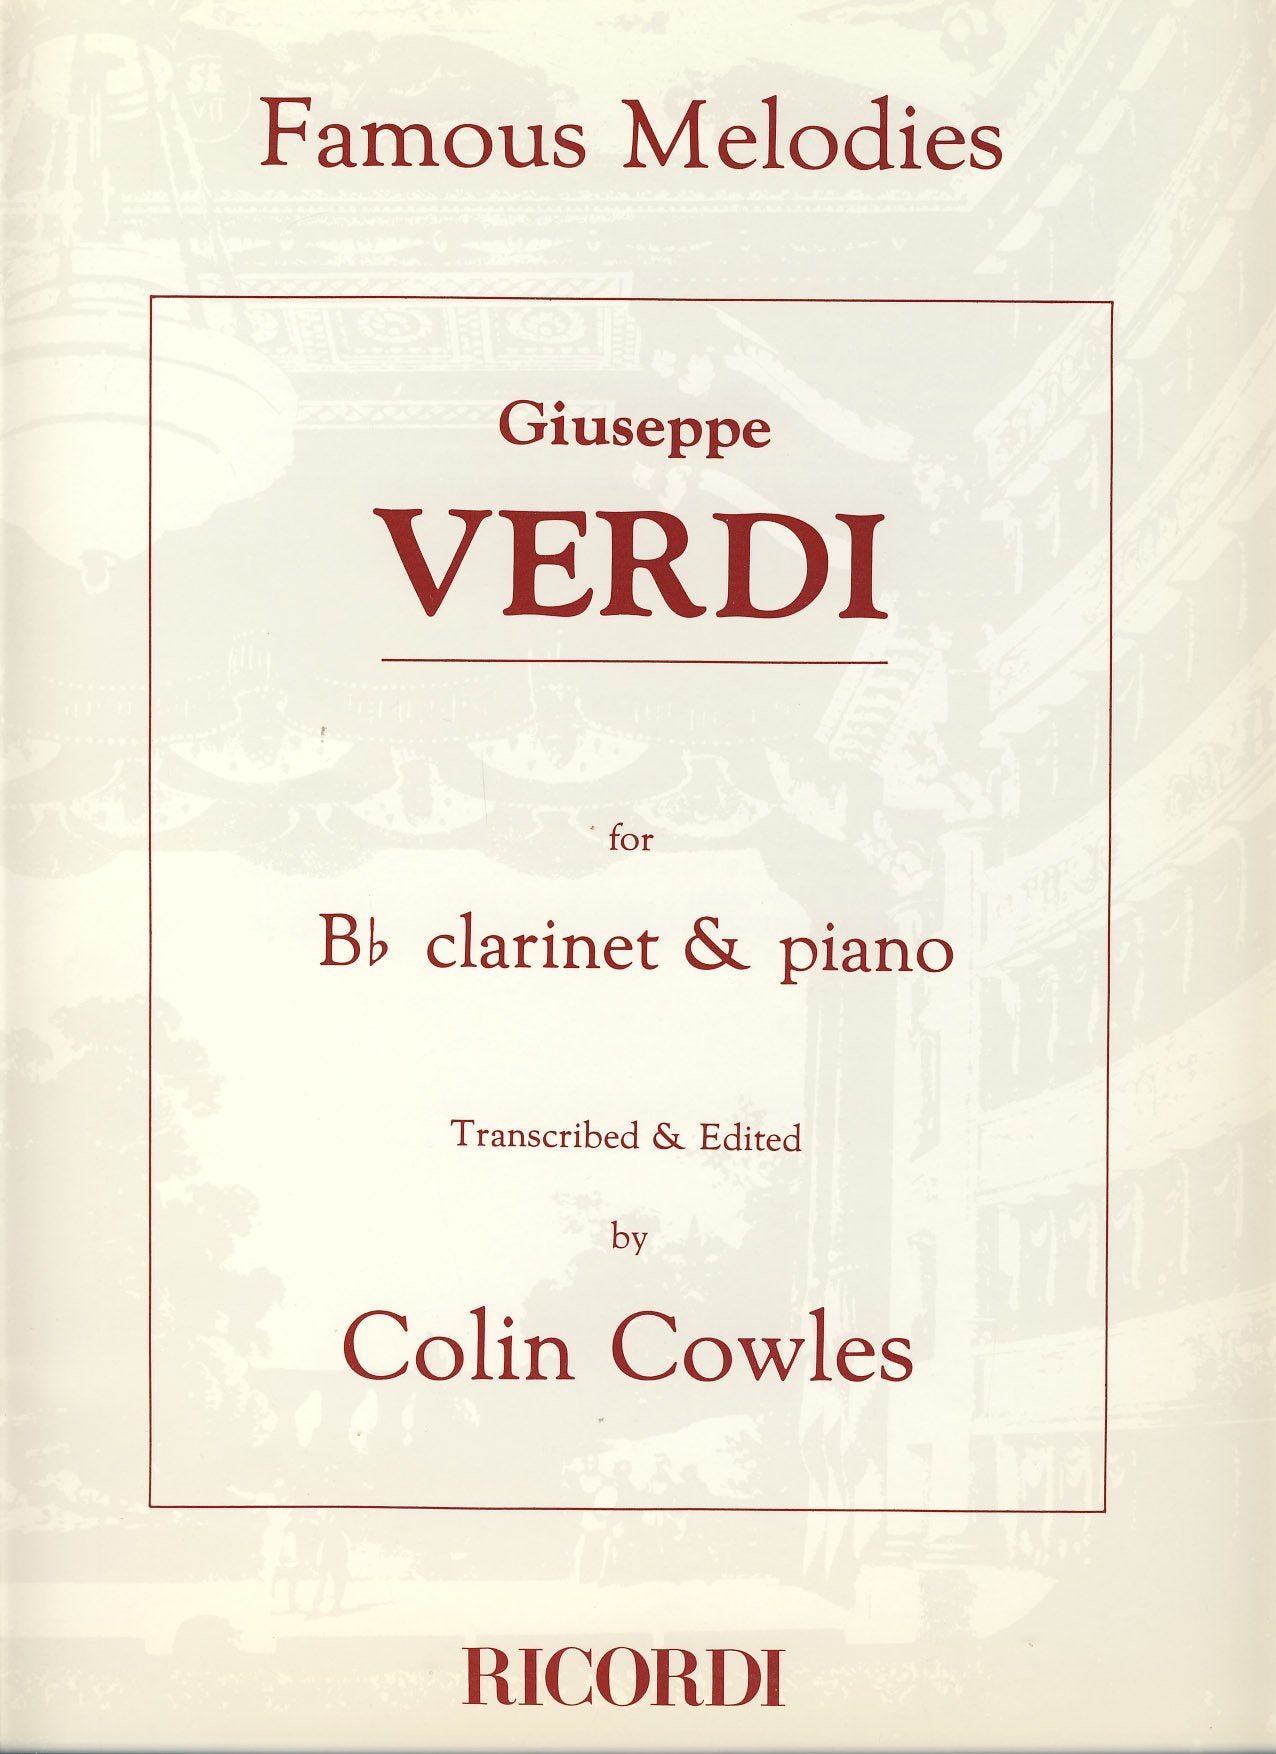 Six Famous Melodies For Bb Clarinet And Piano G.Verdi - Ed.Ricordi